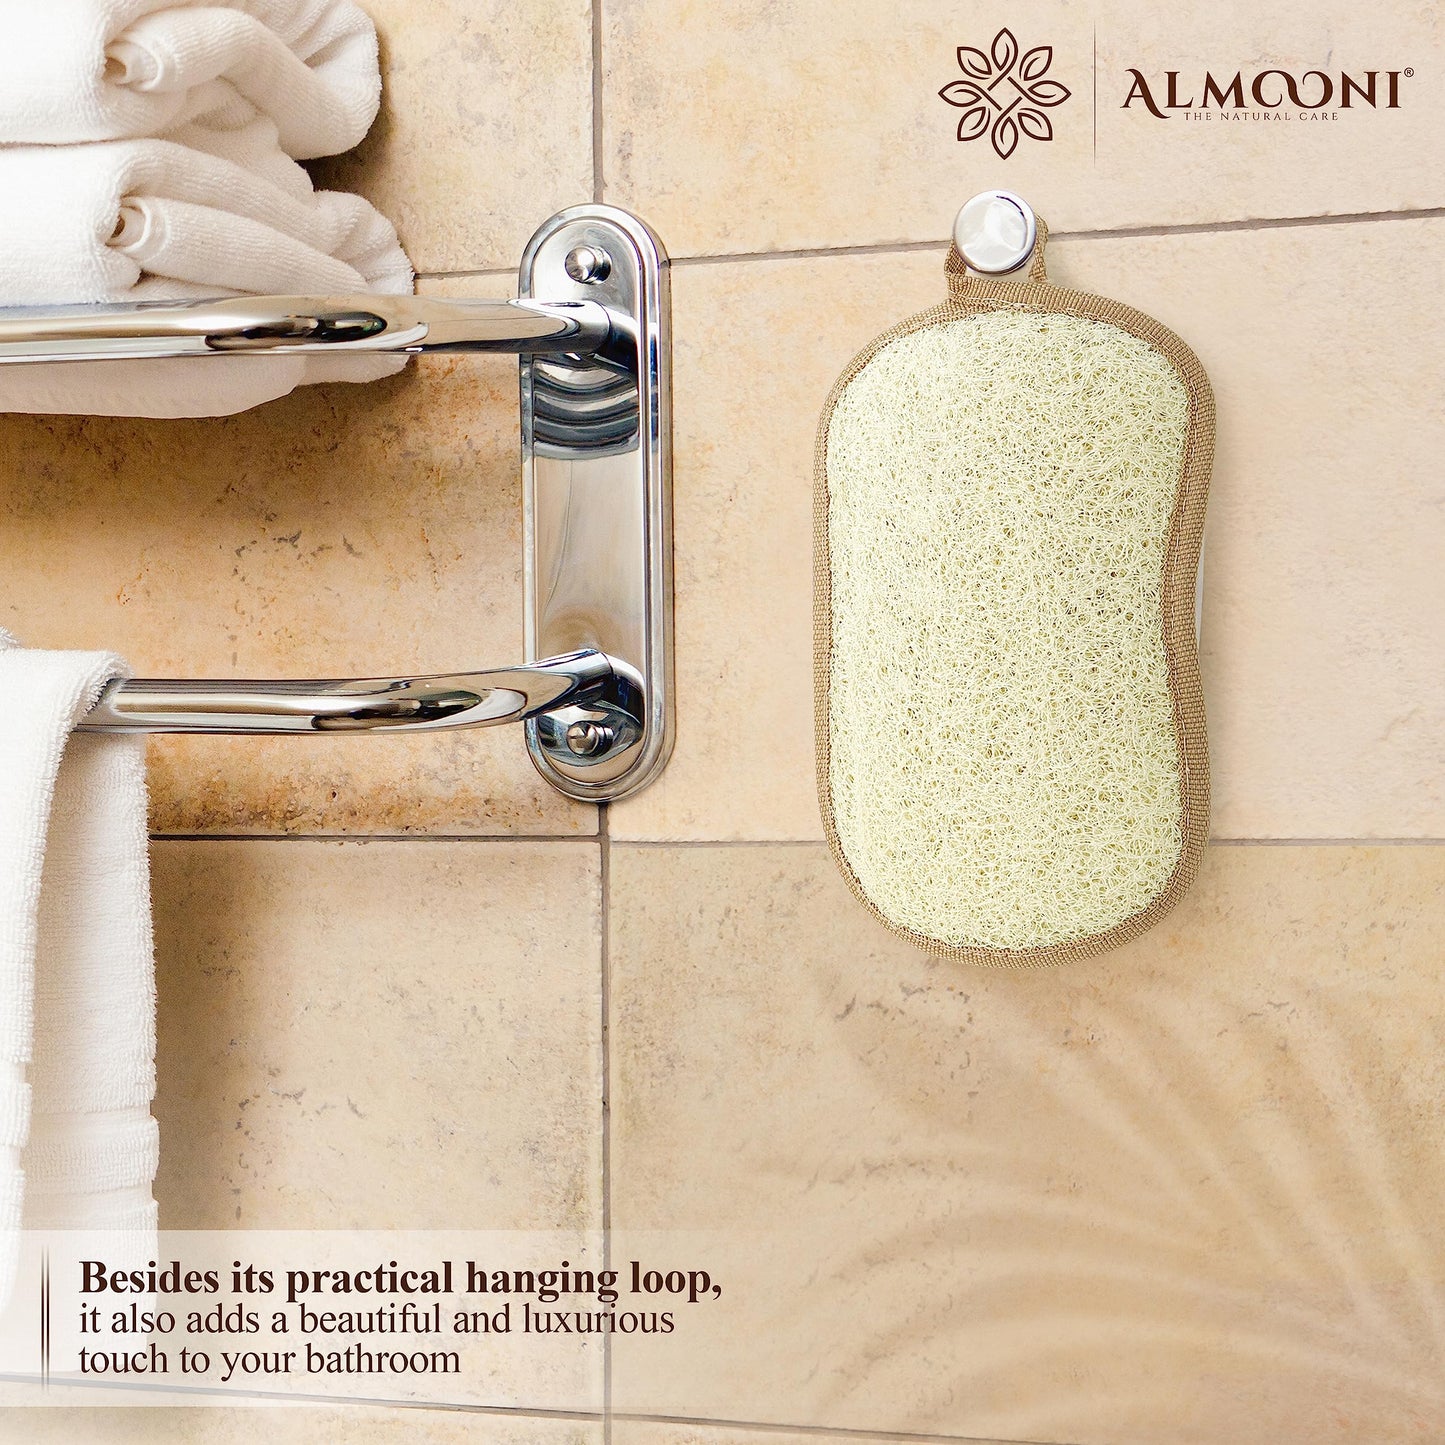 Almooni Premium Exfoliating Loofah Pad Body Scrubber, Made with Natural Egyptian Shower loofa Sponge- Bow Tie Shaped Loofah - 2 Count(1 Pack)